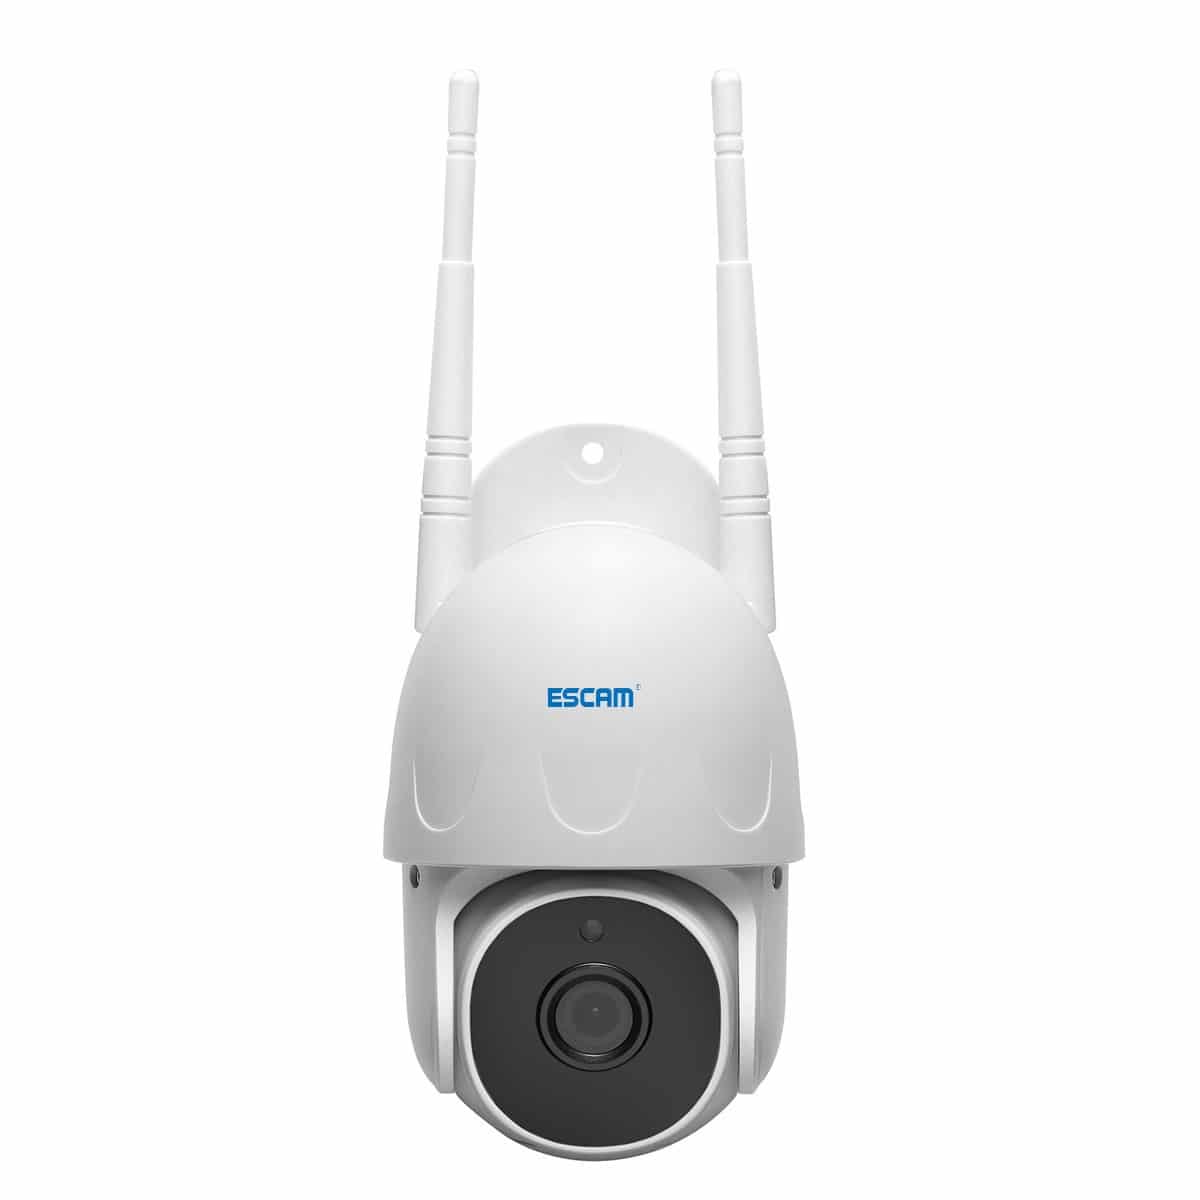 ESCAM TY100 securitytech front